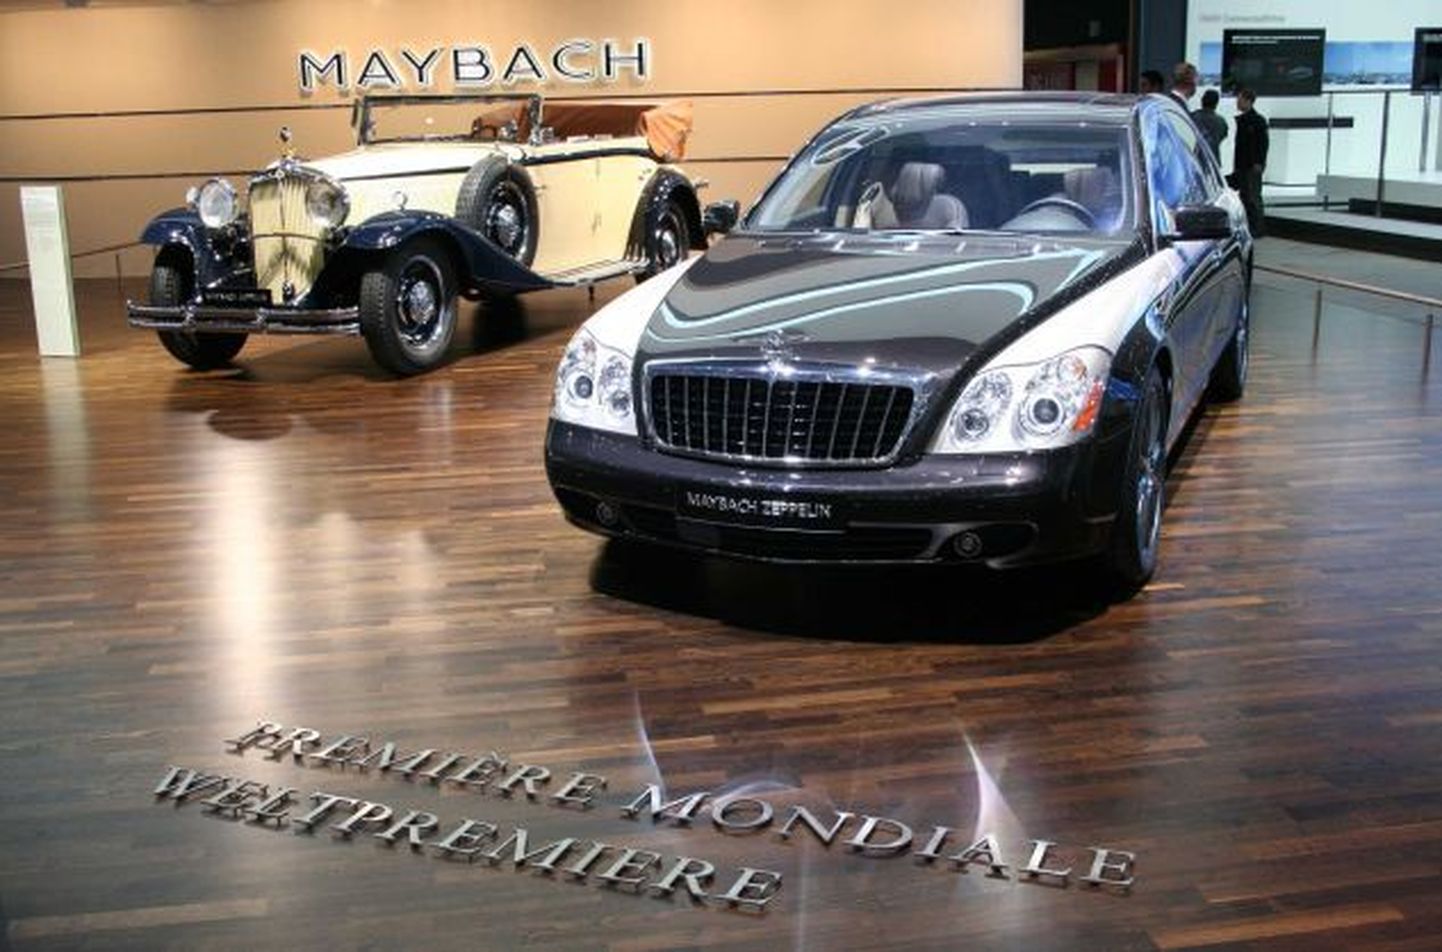 Maybachid Genfi automessil. Esiplaanil
Maybach 57 Zeppelin.